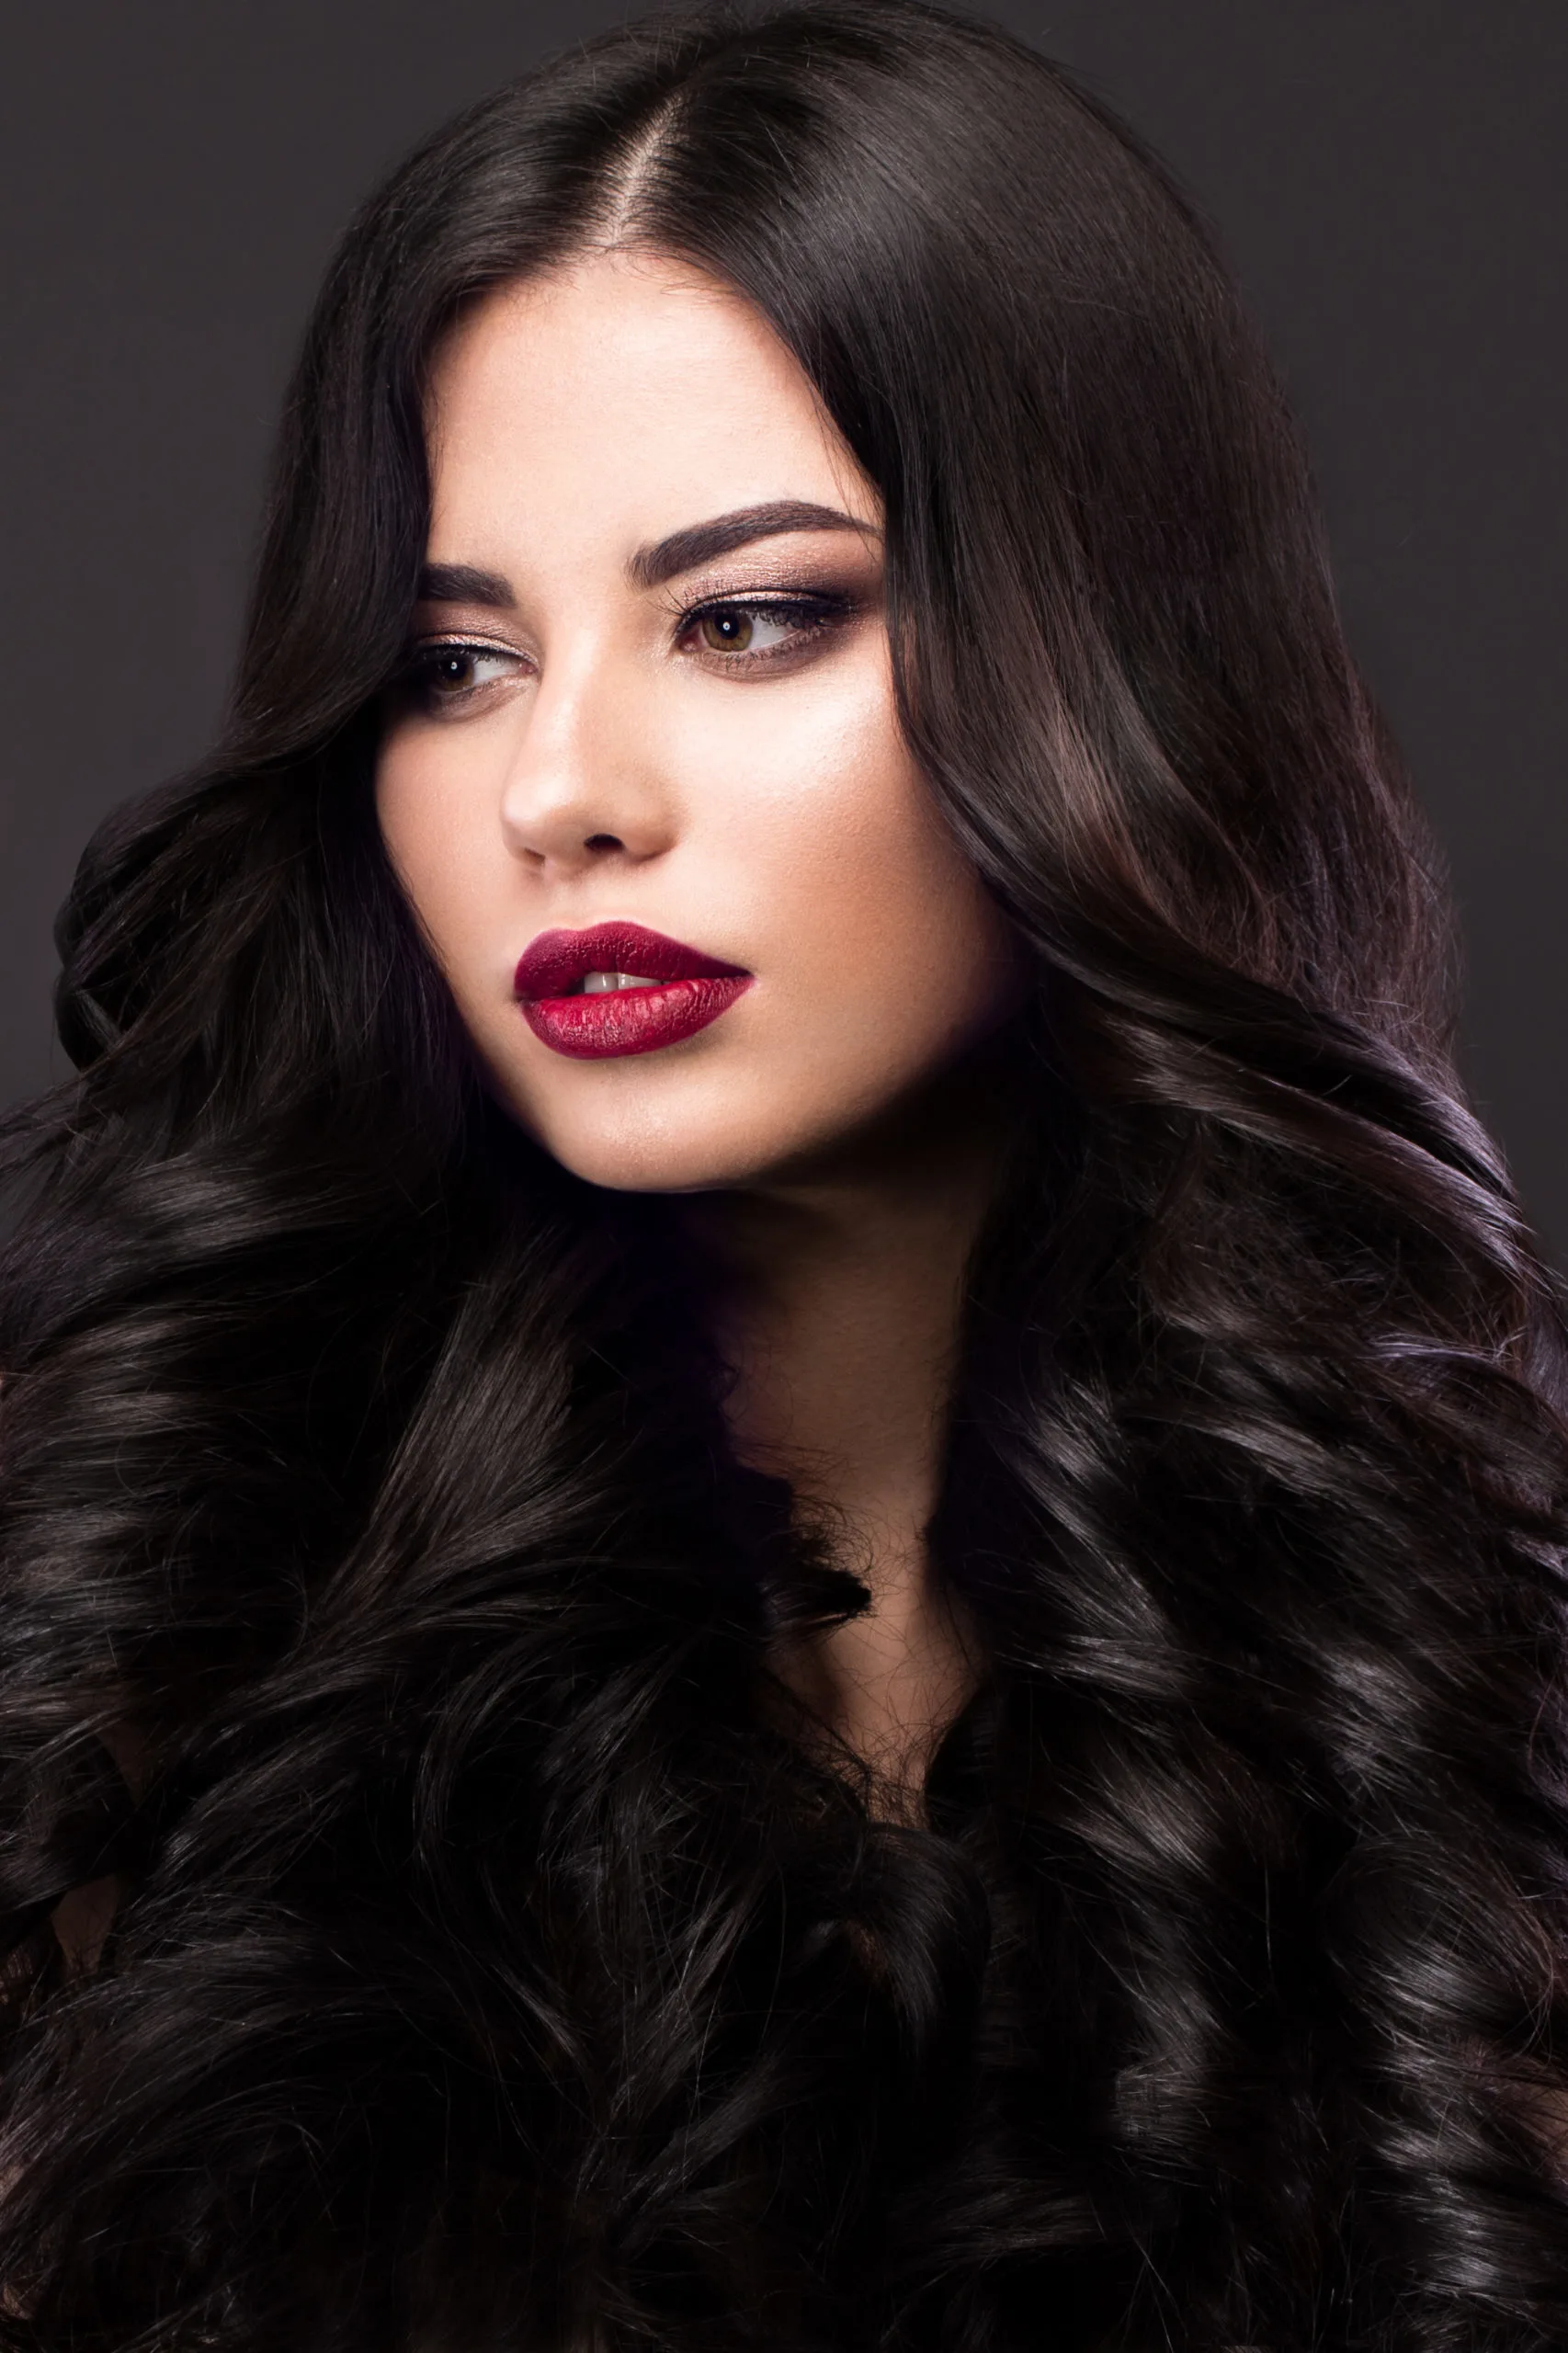 Violet Black winter hair color on a woman with pale skin in red lip